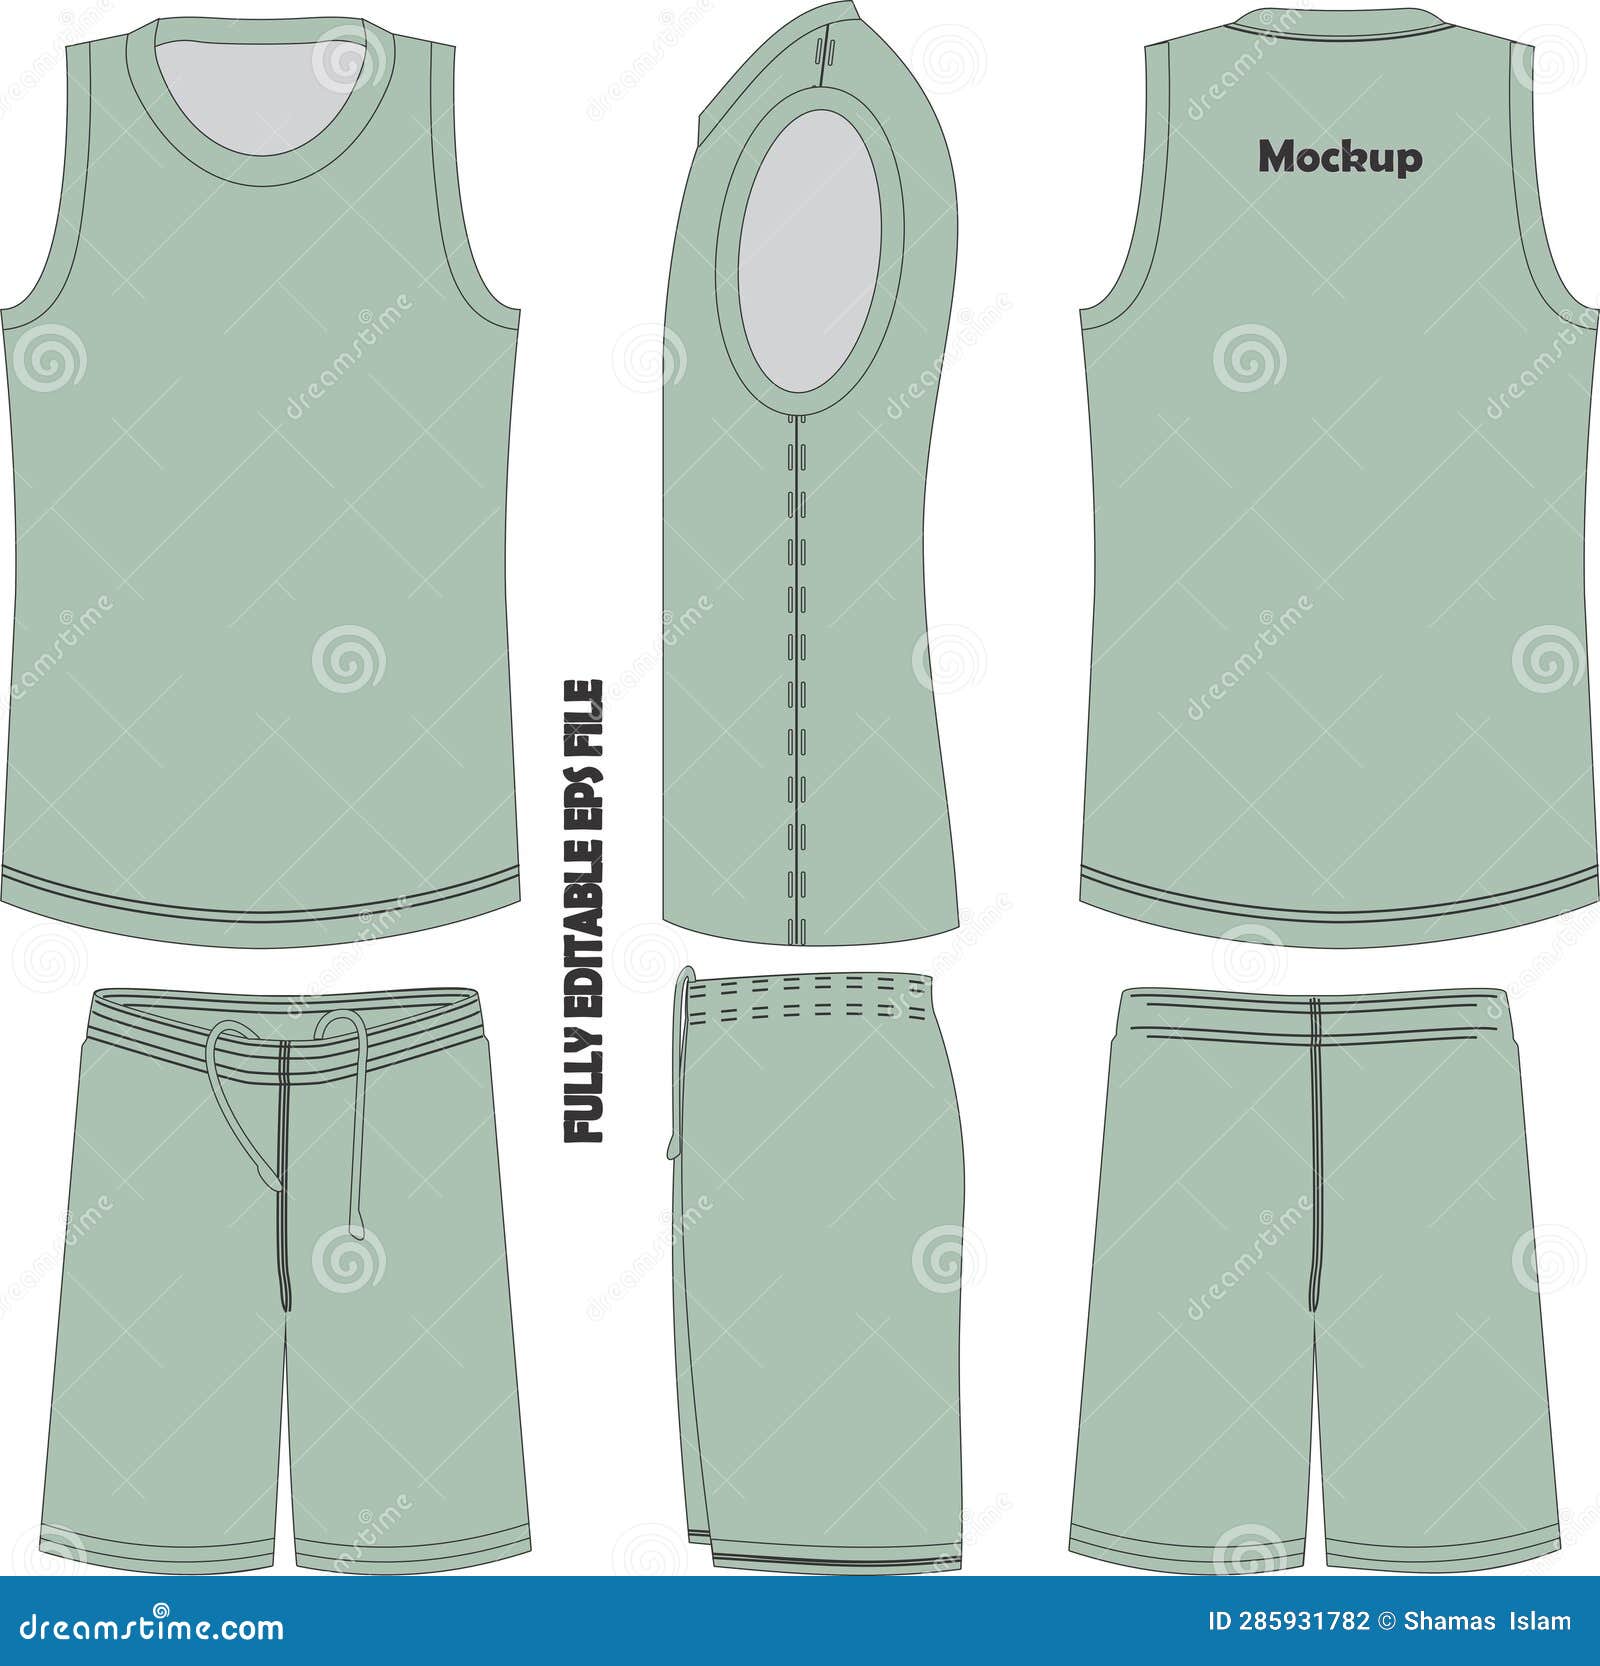 Basketball Uniform Custom Design Mock Ups Templates Design For Basketball  Club T-shirt Mock Up For Basketball Jersey. Front View, Back View And Side  View Basketball Shirt And Shorts Royalty Free SVG, Cliparts